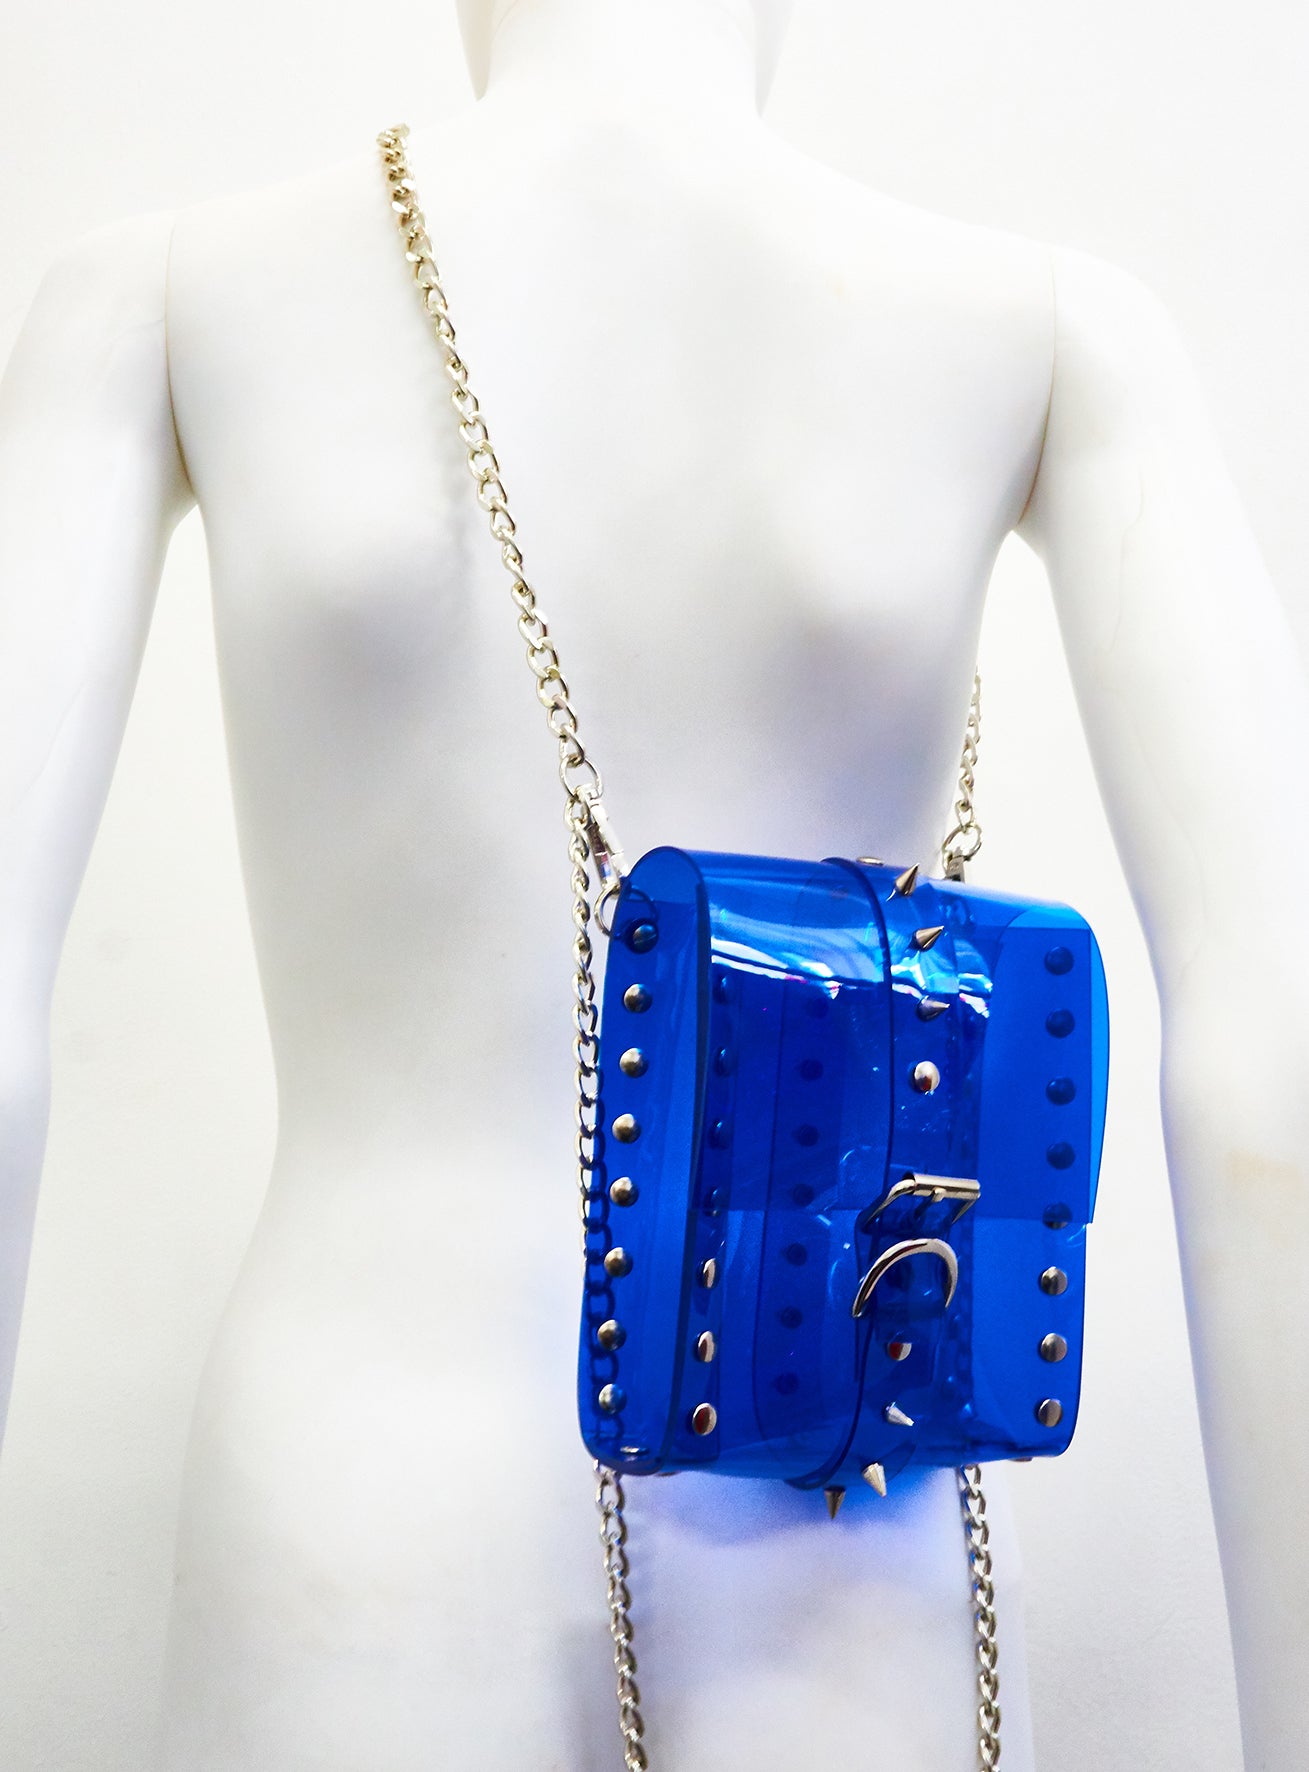 Jivomir Domoustchiev The Dream Collector transparent blueJivomir Domoustchiev The Dream Collector Bag clear red vegan vinyl studded chain purse collectible handbag